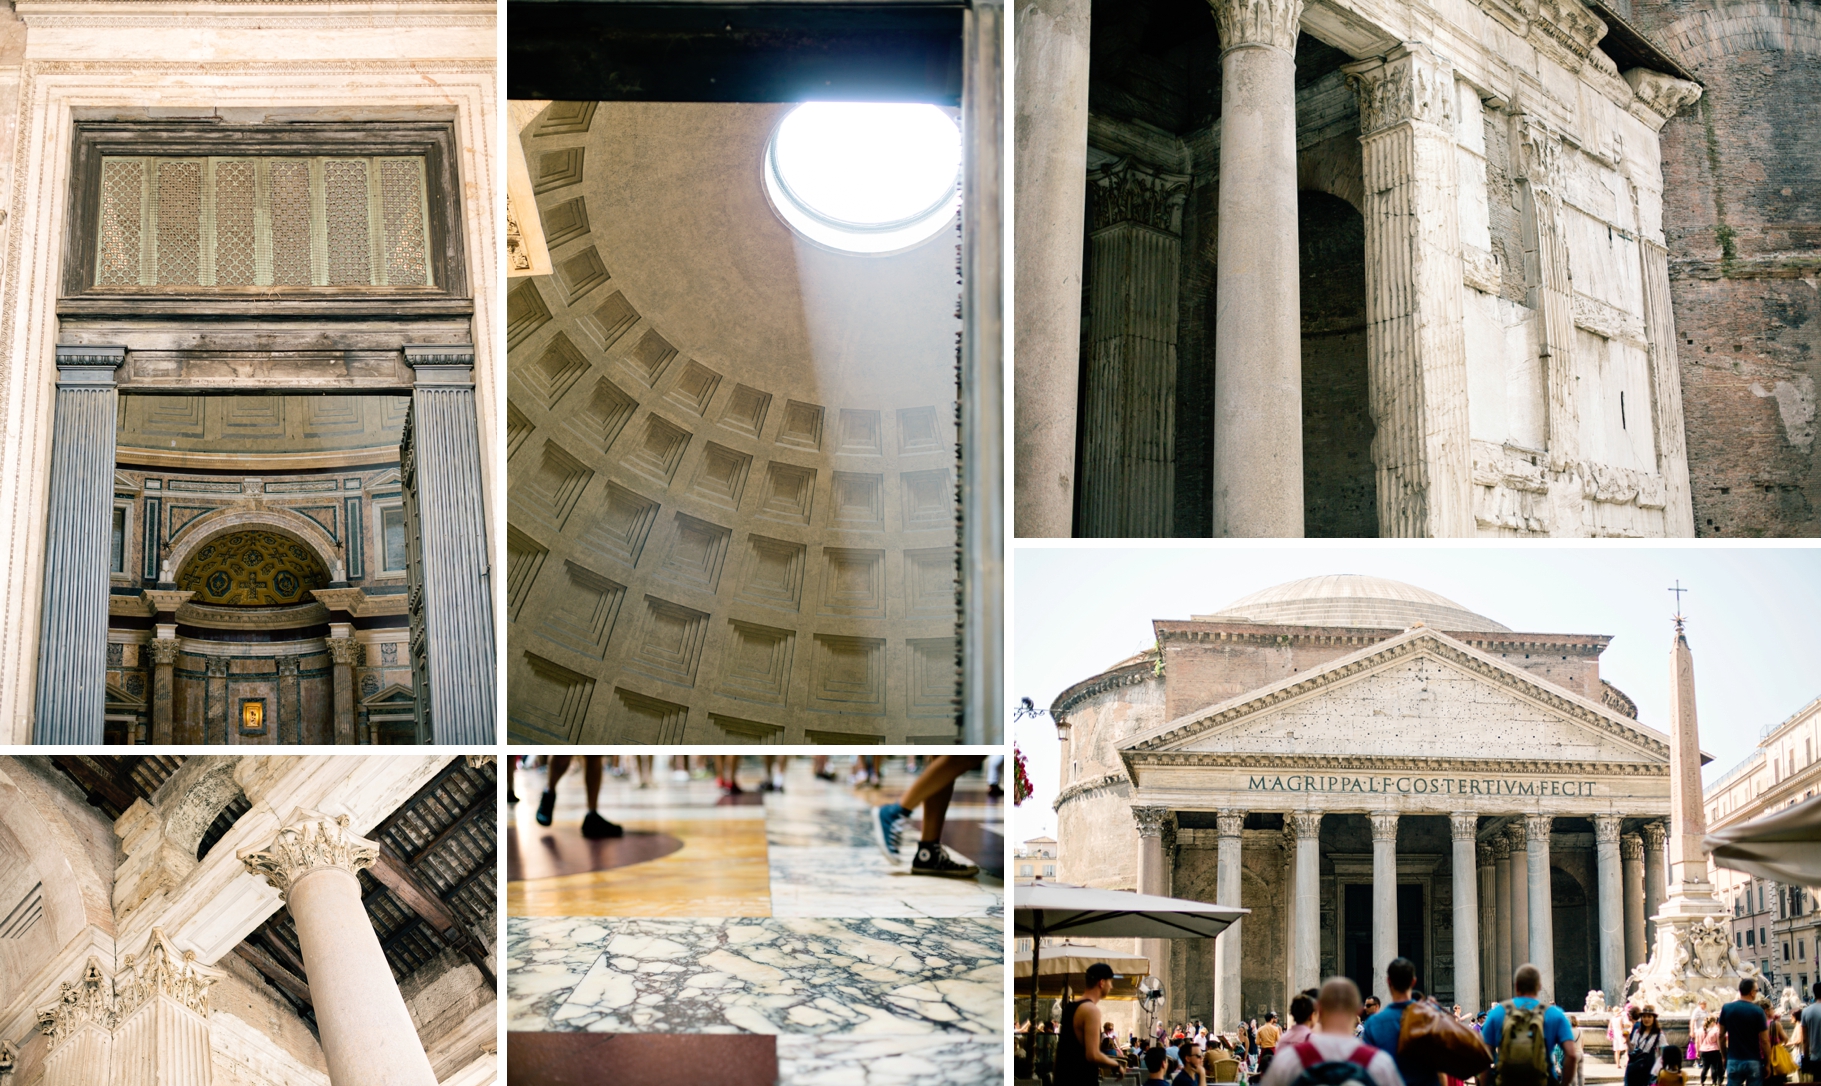 4-Pantheon-Rome-Italy-Europe-Travel-Anniversary-Trip-Photography-by-Betty-Elaine